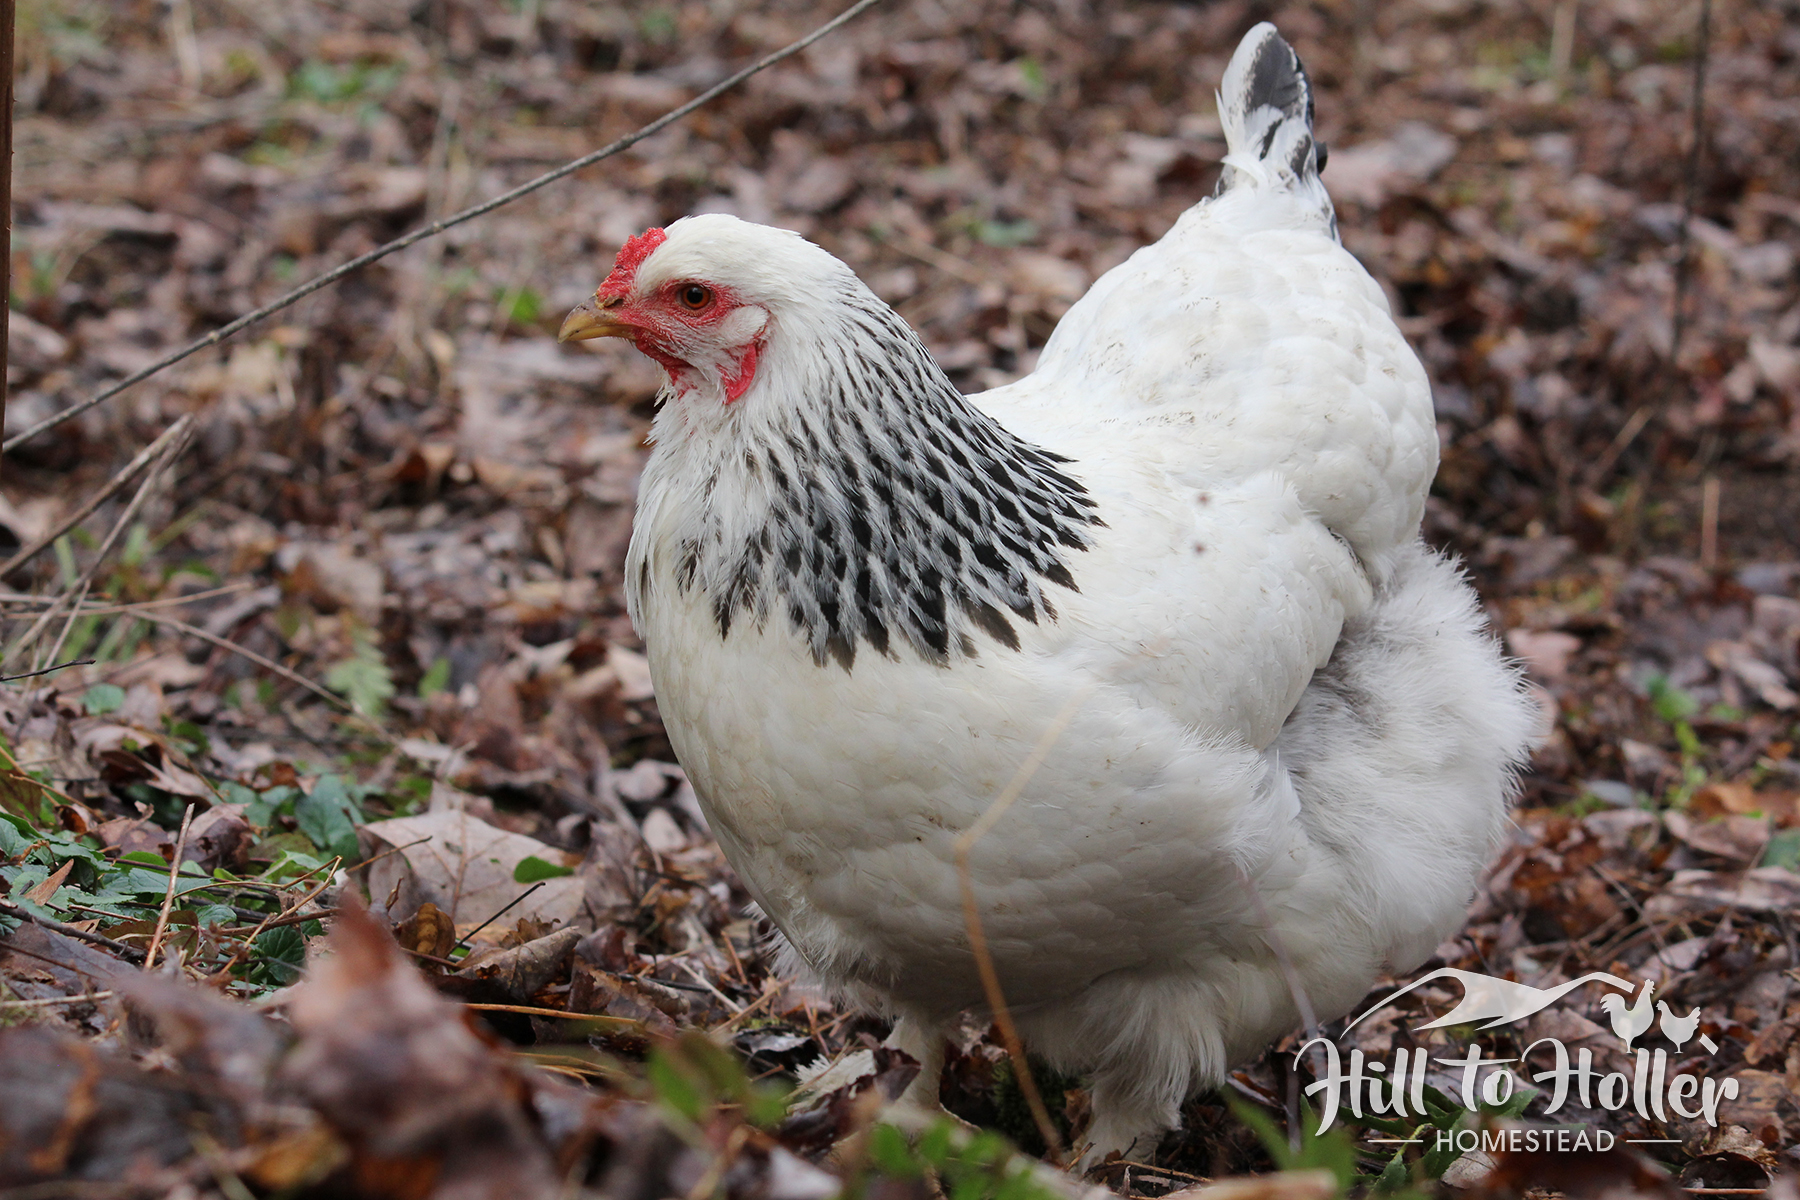 Blue 12 Assorted Brahma chicken hatching eggs large fowl hens choice